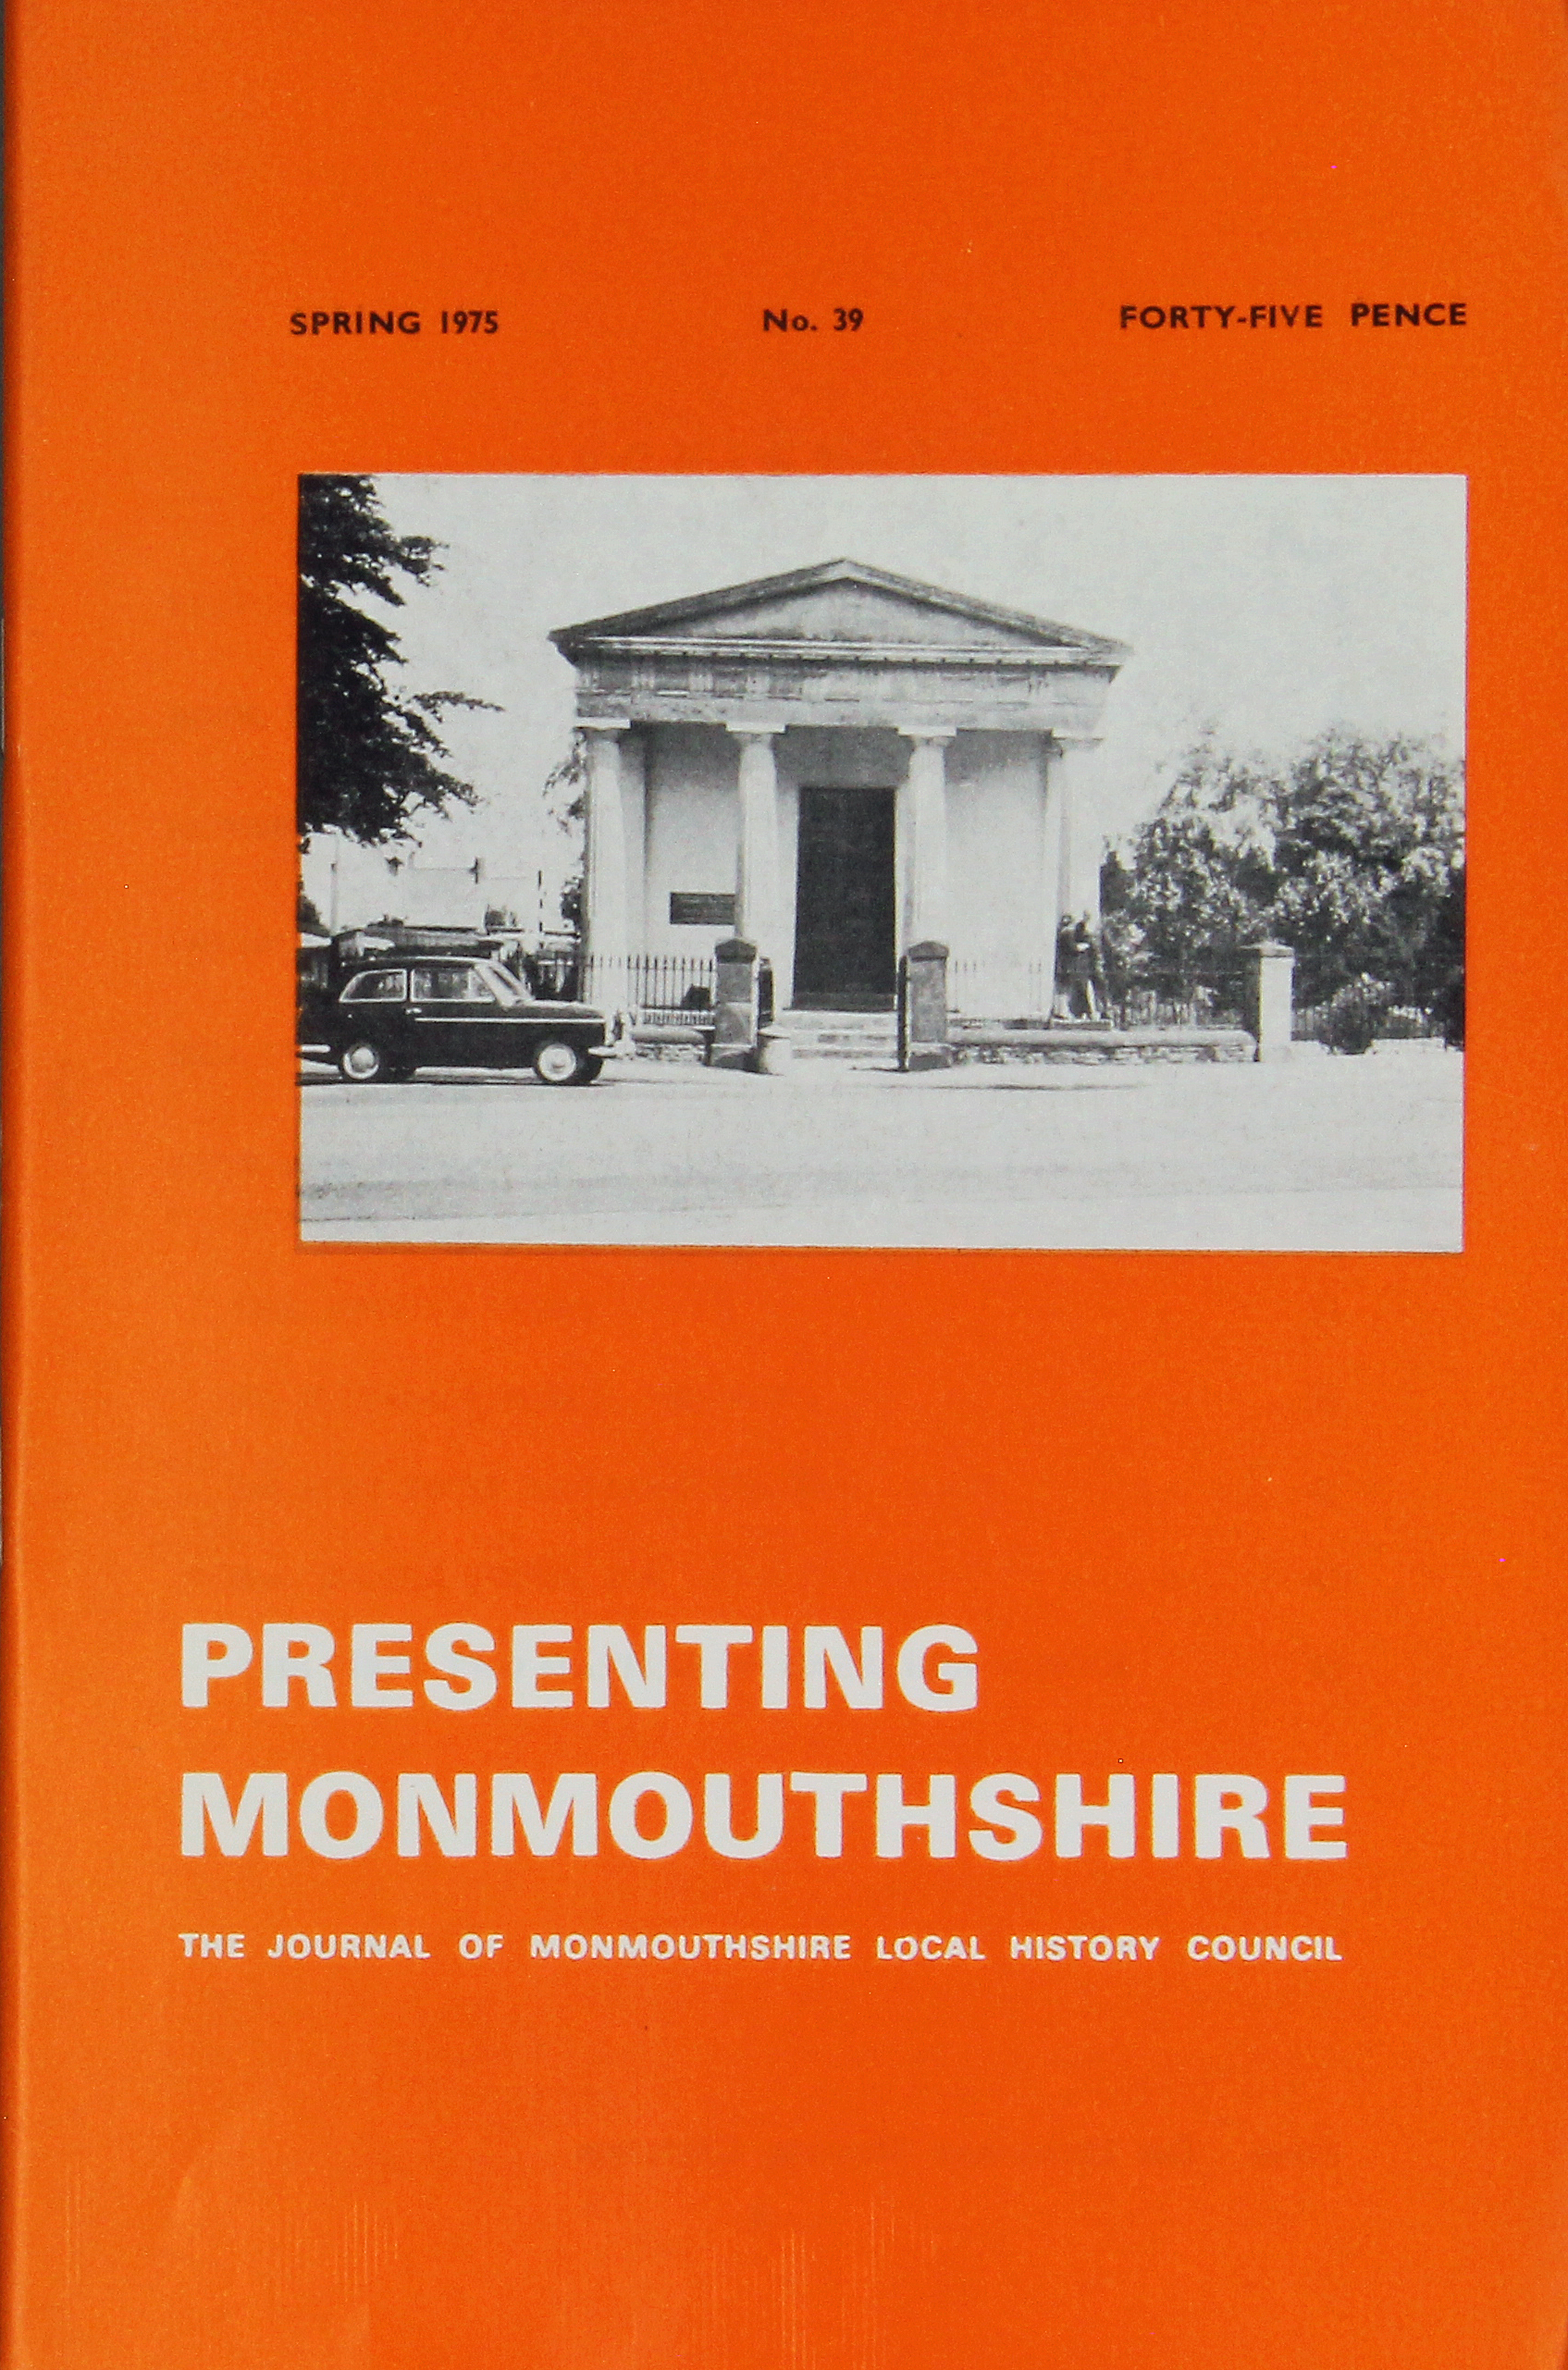 Presenting Monmouthshire: The journal of Monmouthshire Local History No.39, Spring 1975, £0.20